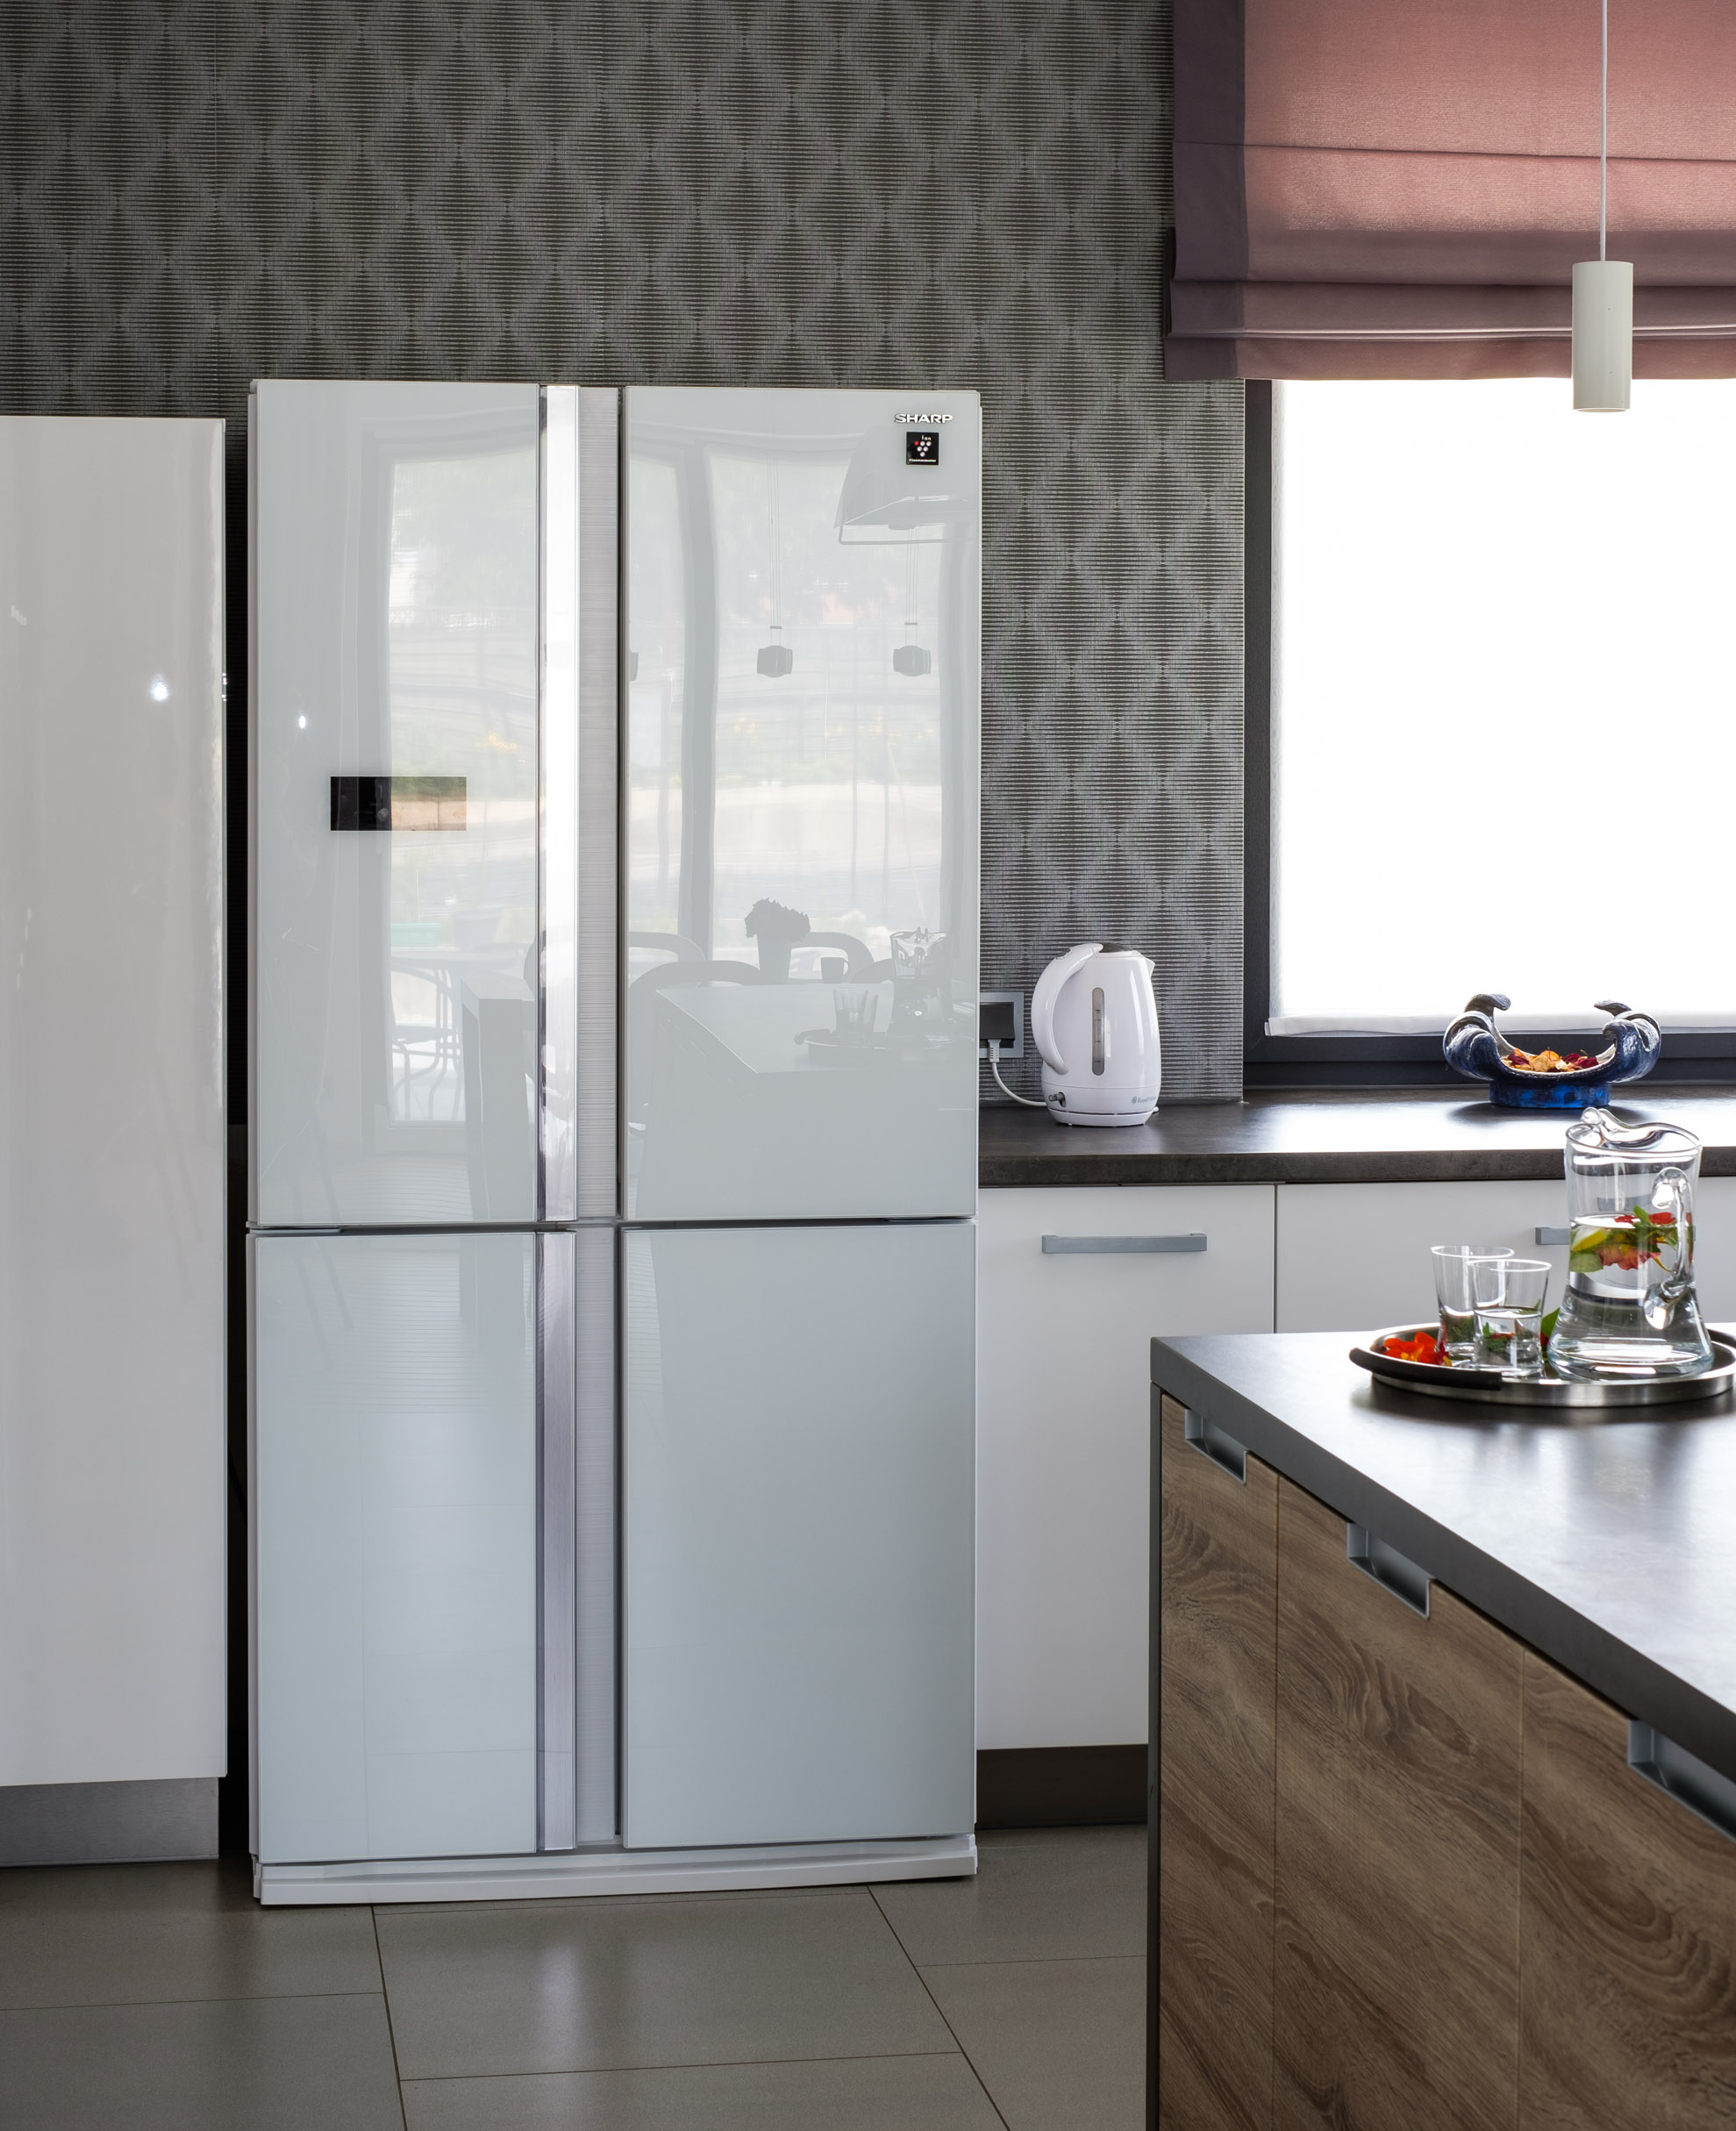 Advanced Cooling Technology: Sharp 4-Door Refrigerator with Plasmacluster